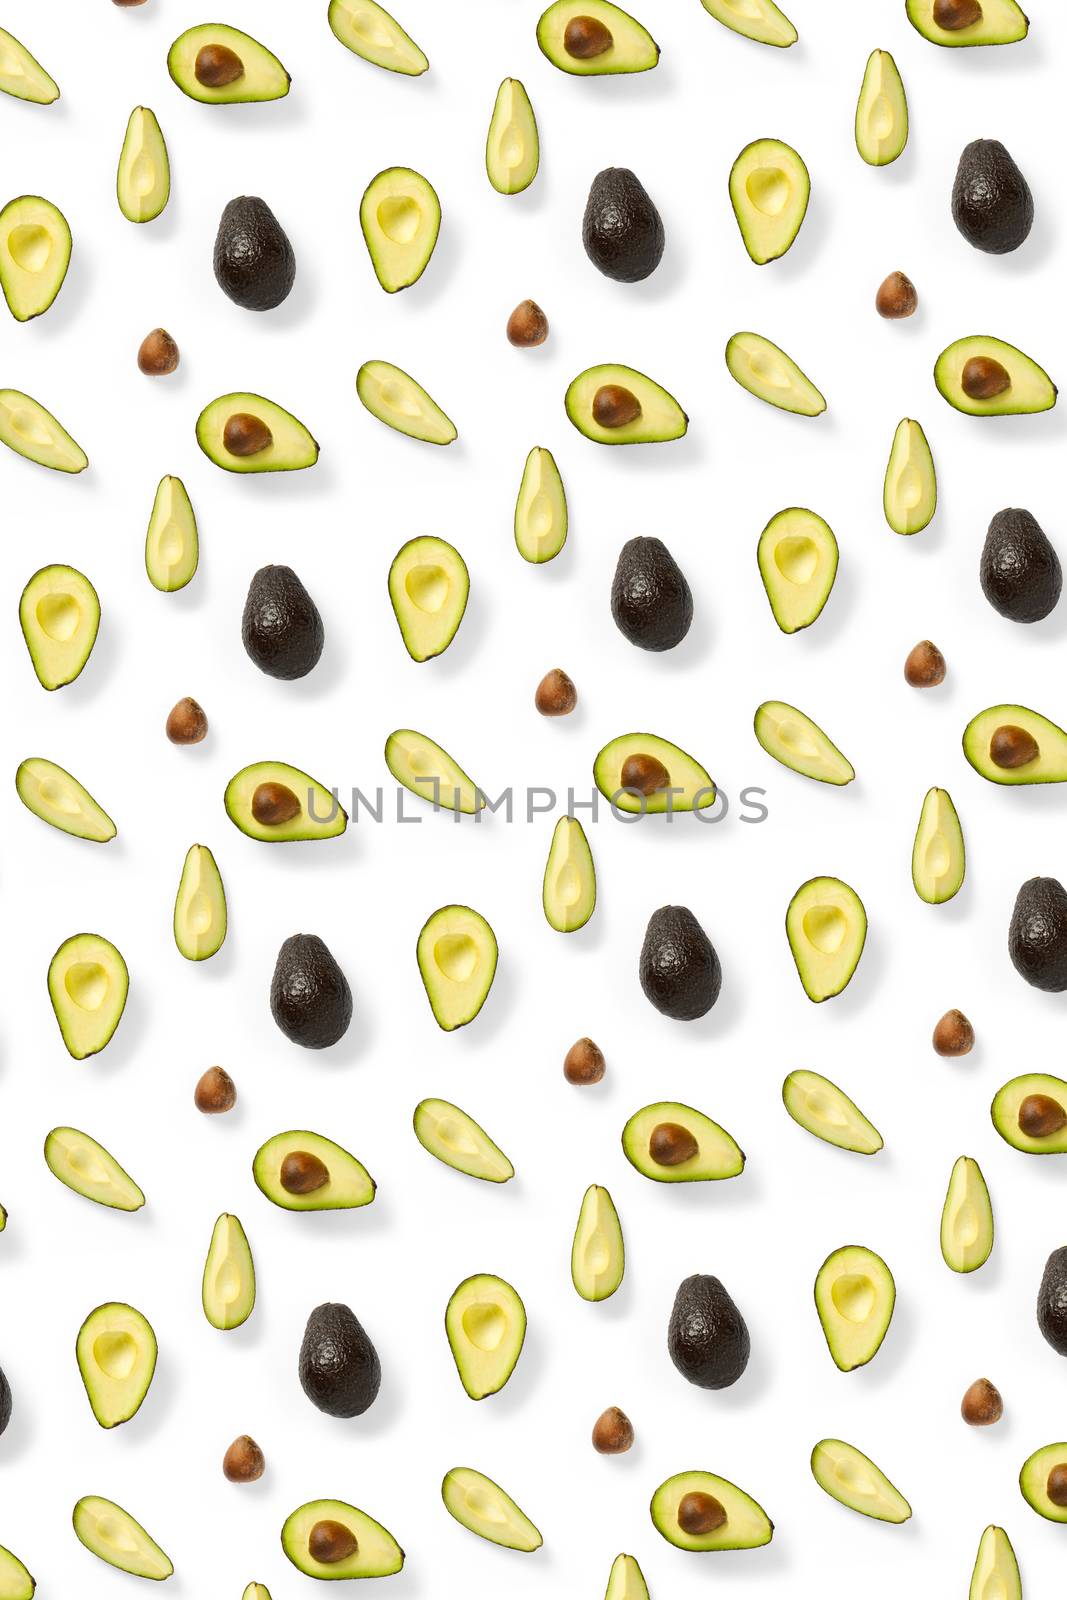 Avocado. Background made from isolated Avocado pieces on white background. Flat lay of fresh ripe avocados and avacado pieces. by PhotoTime